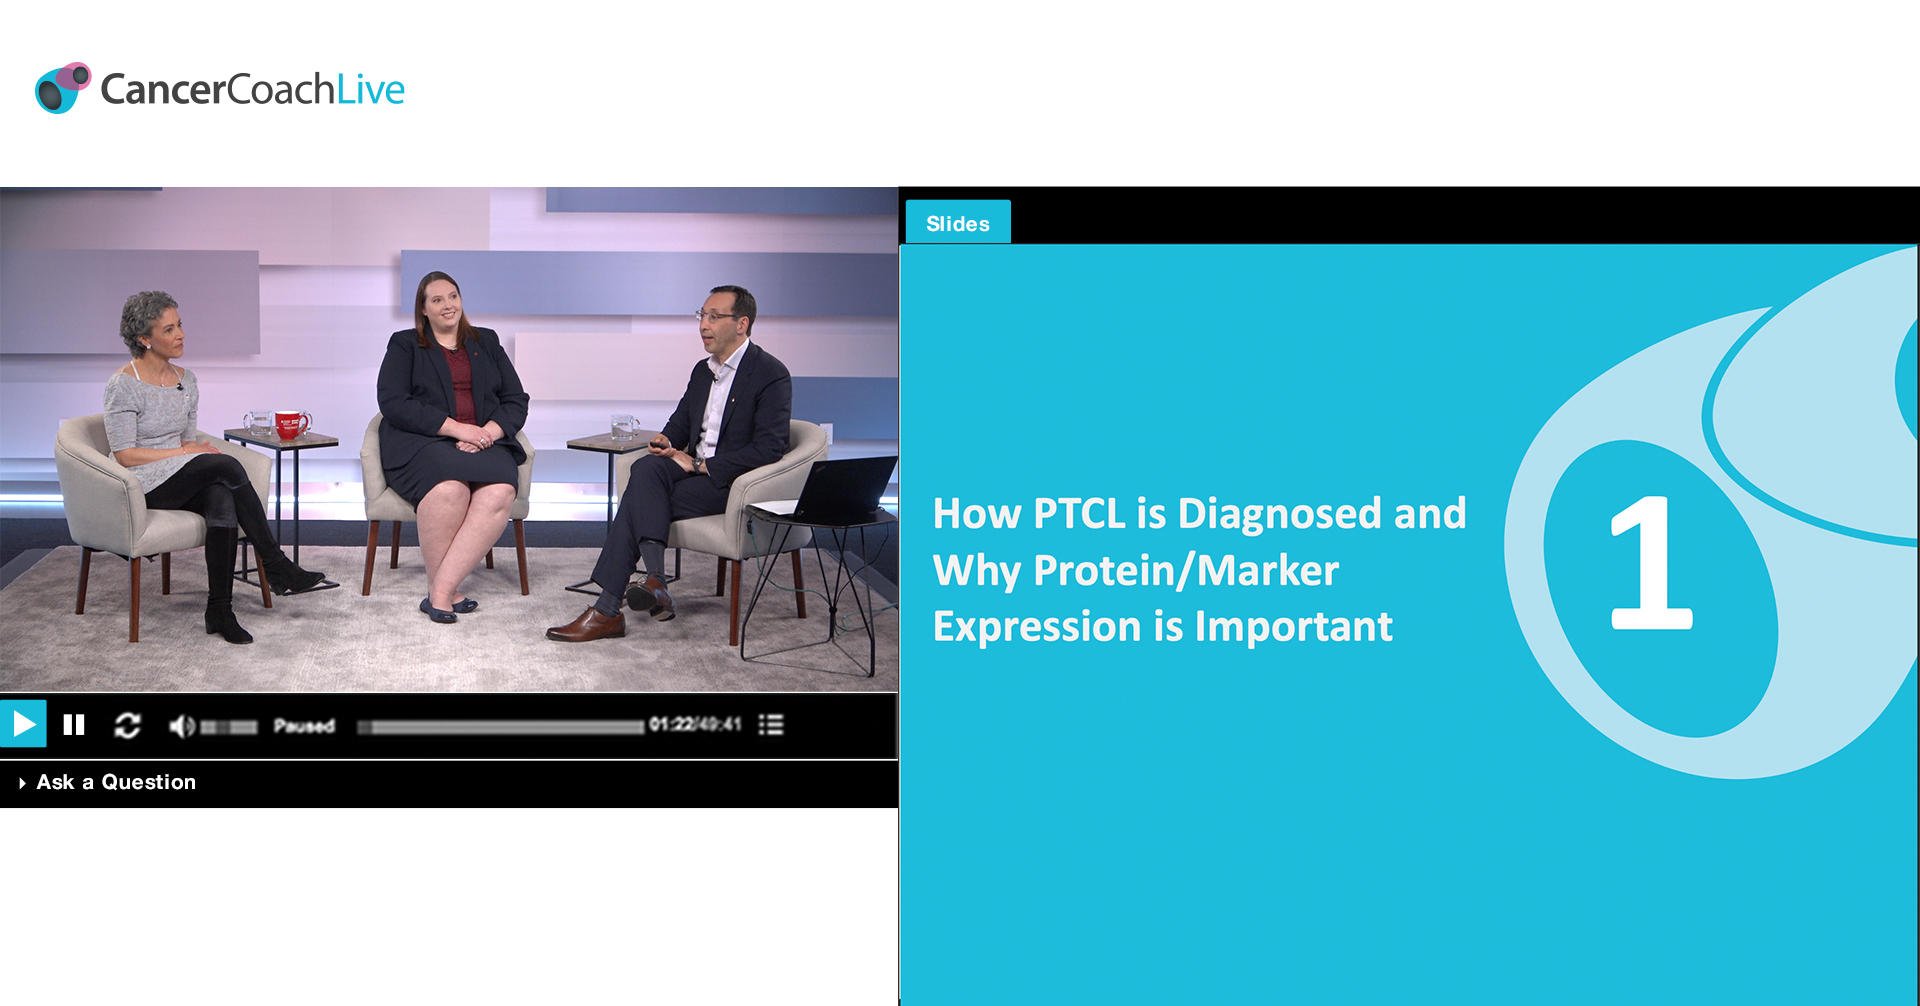 Chapter 1: How PTCL is Diagnosed and Why Protein/Marker Expression is Important